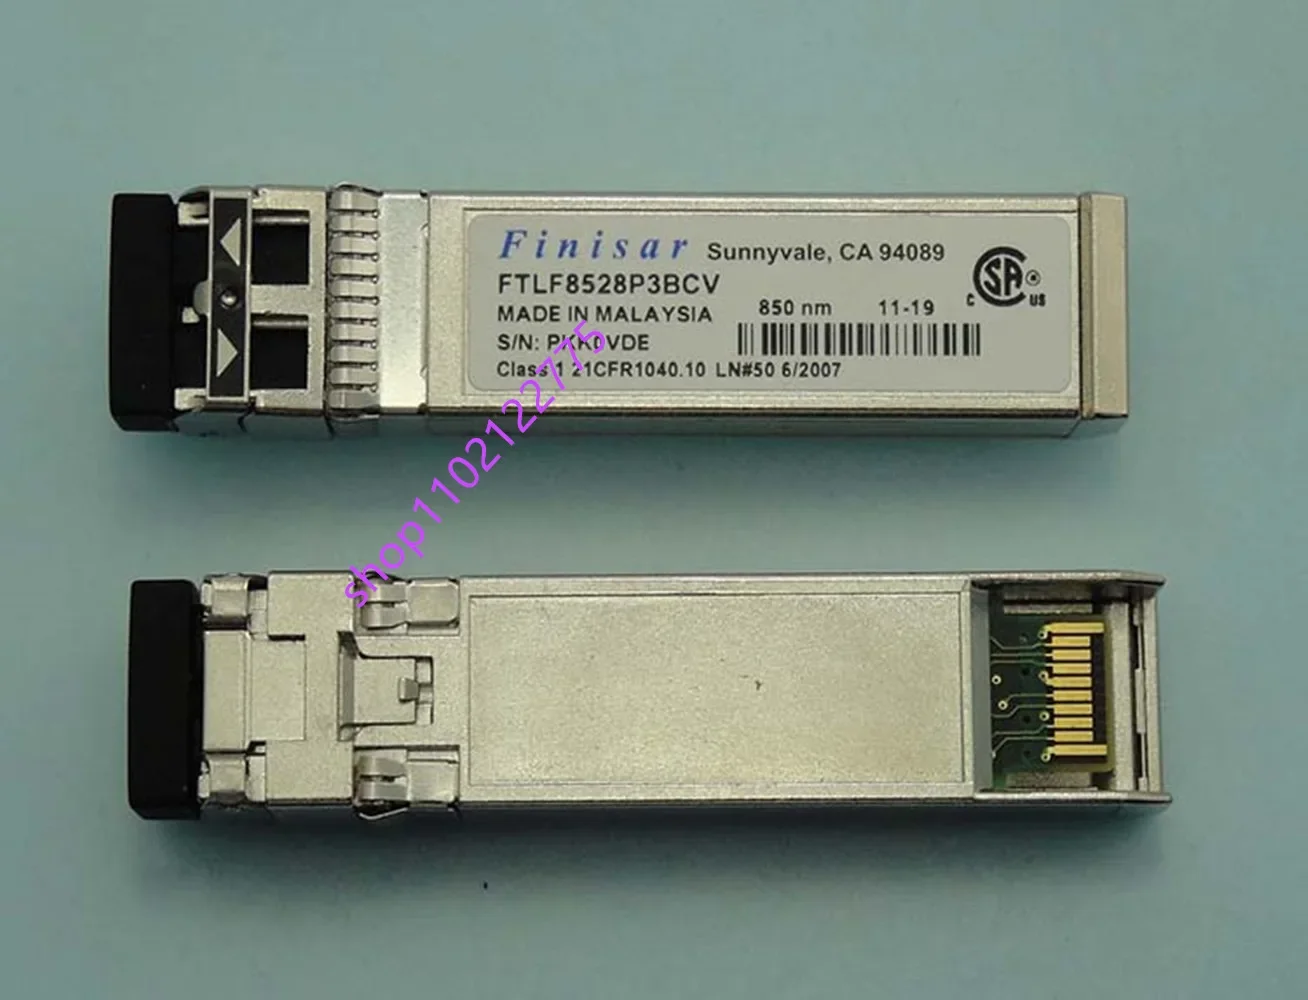 FTLF8528P3BCV Finisar 8GB SFP+ SW 850nm 300m Fibre Channel Transceiver Module Finisar 8g Sfp Transceiver/8g Sfp Fiber Switch four choose one channel audio i2s buffer expansion iis switch module for hifi amp dac